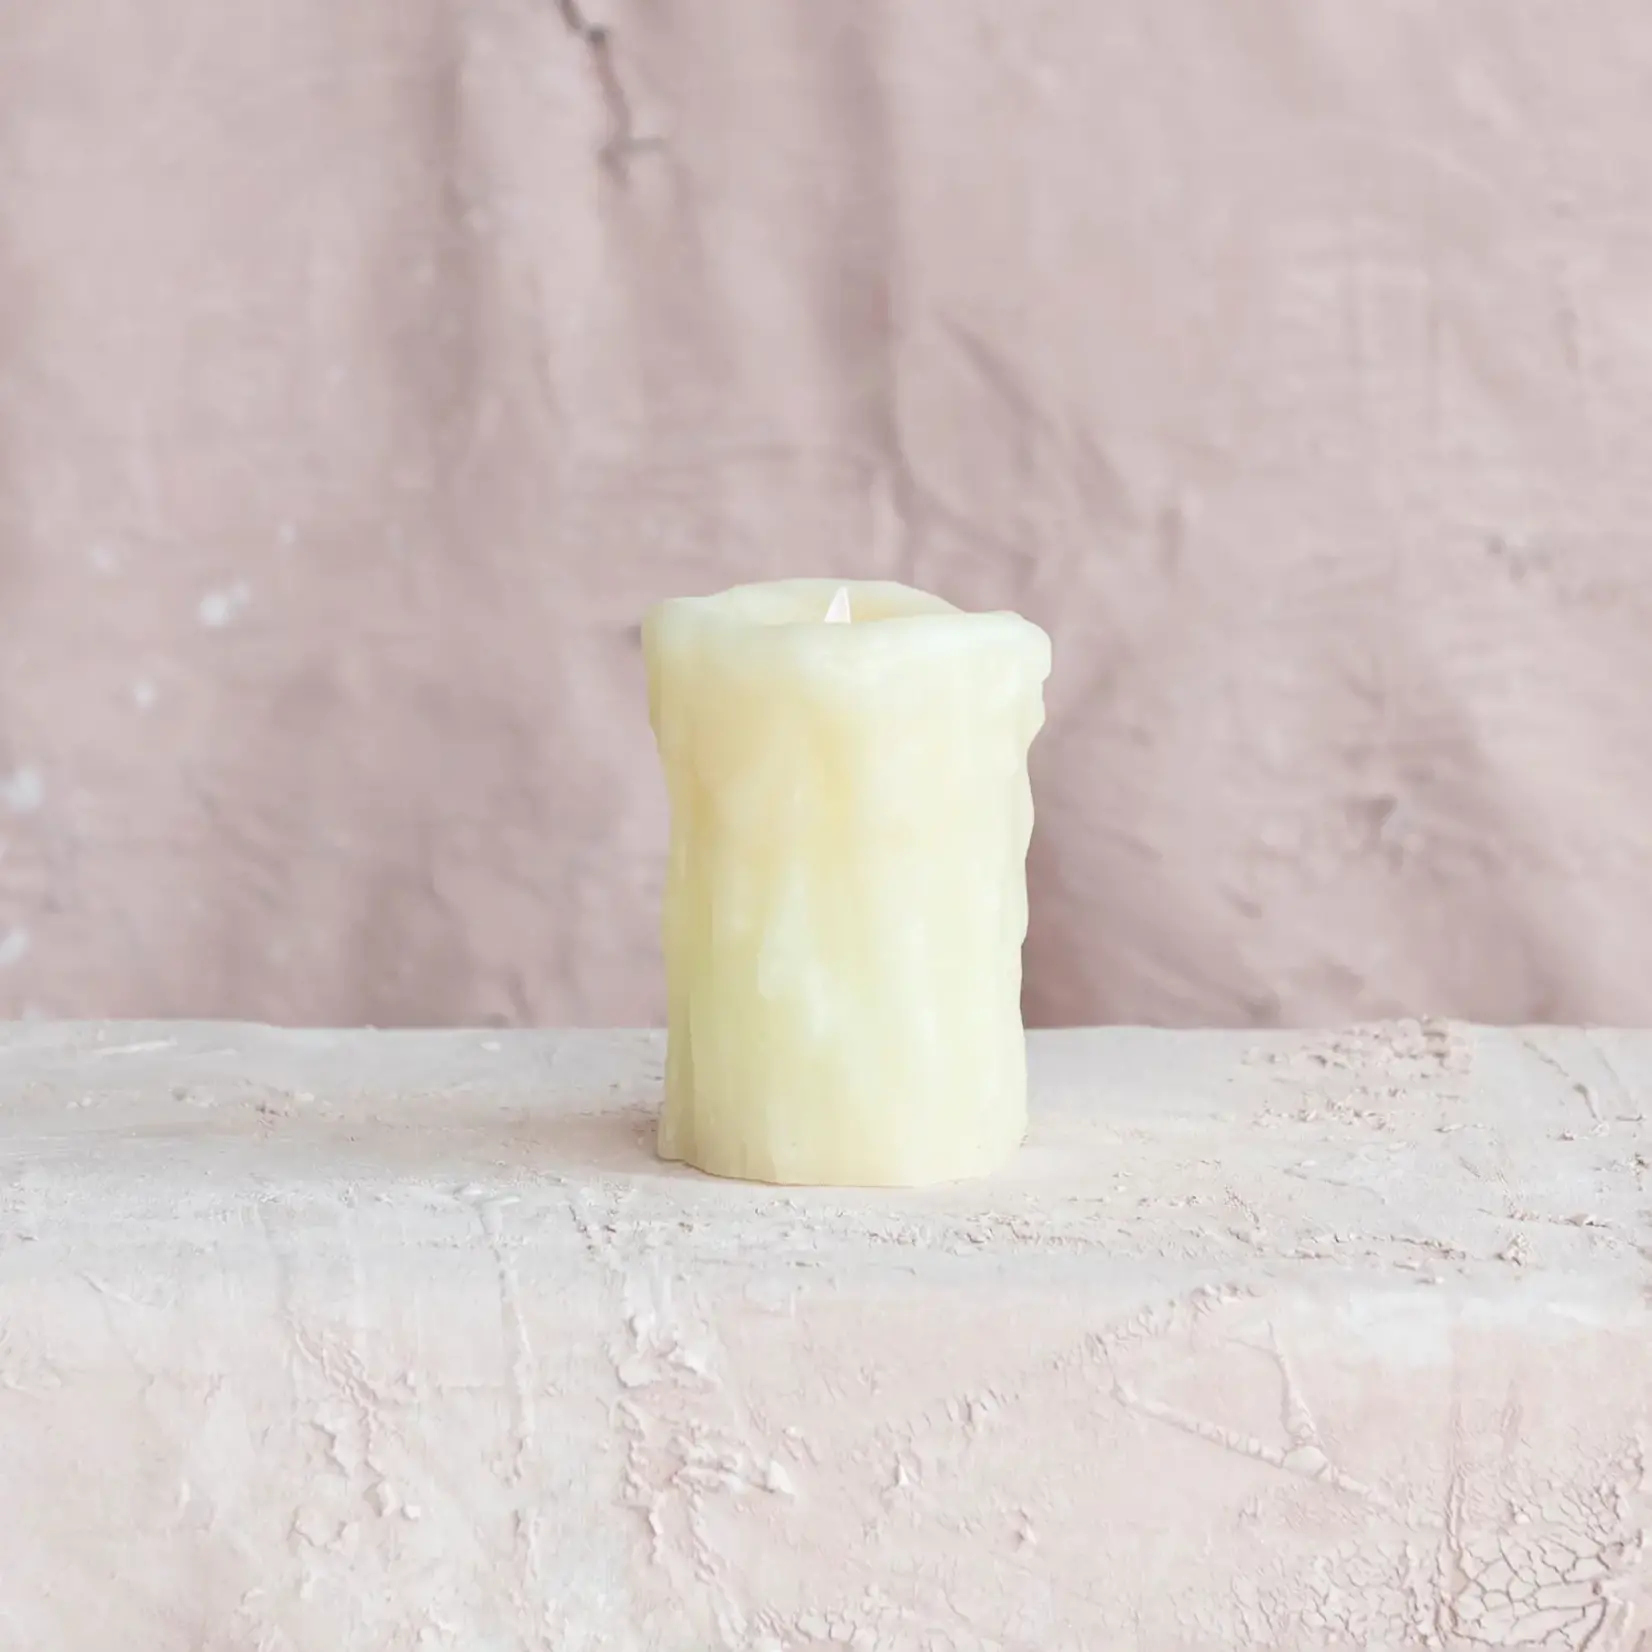 Creative Co-Op Flameless LED Wax Pillar Candle w/ 6 Hour Timer, Cream Color (Requires 3-AAA Battery)